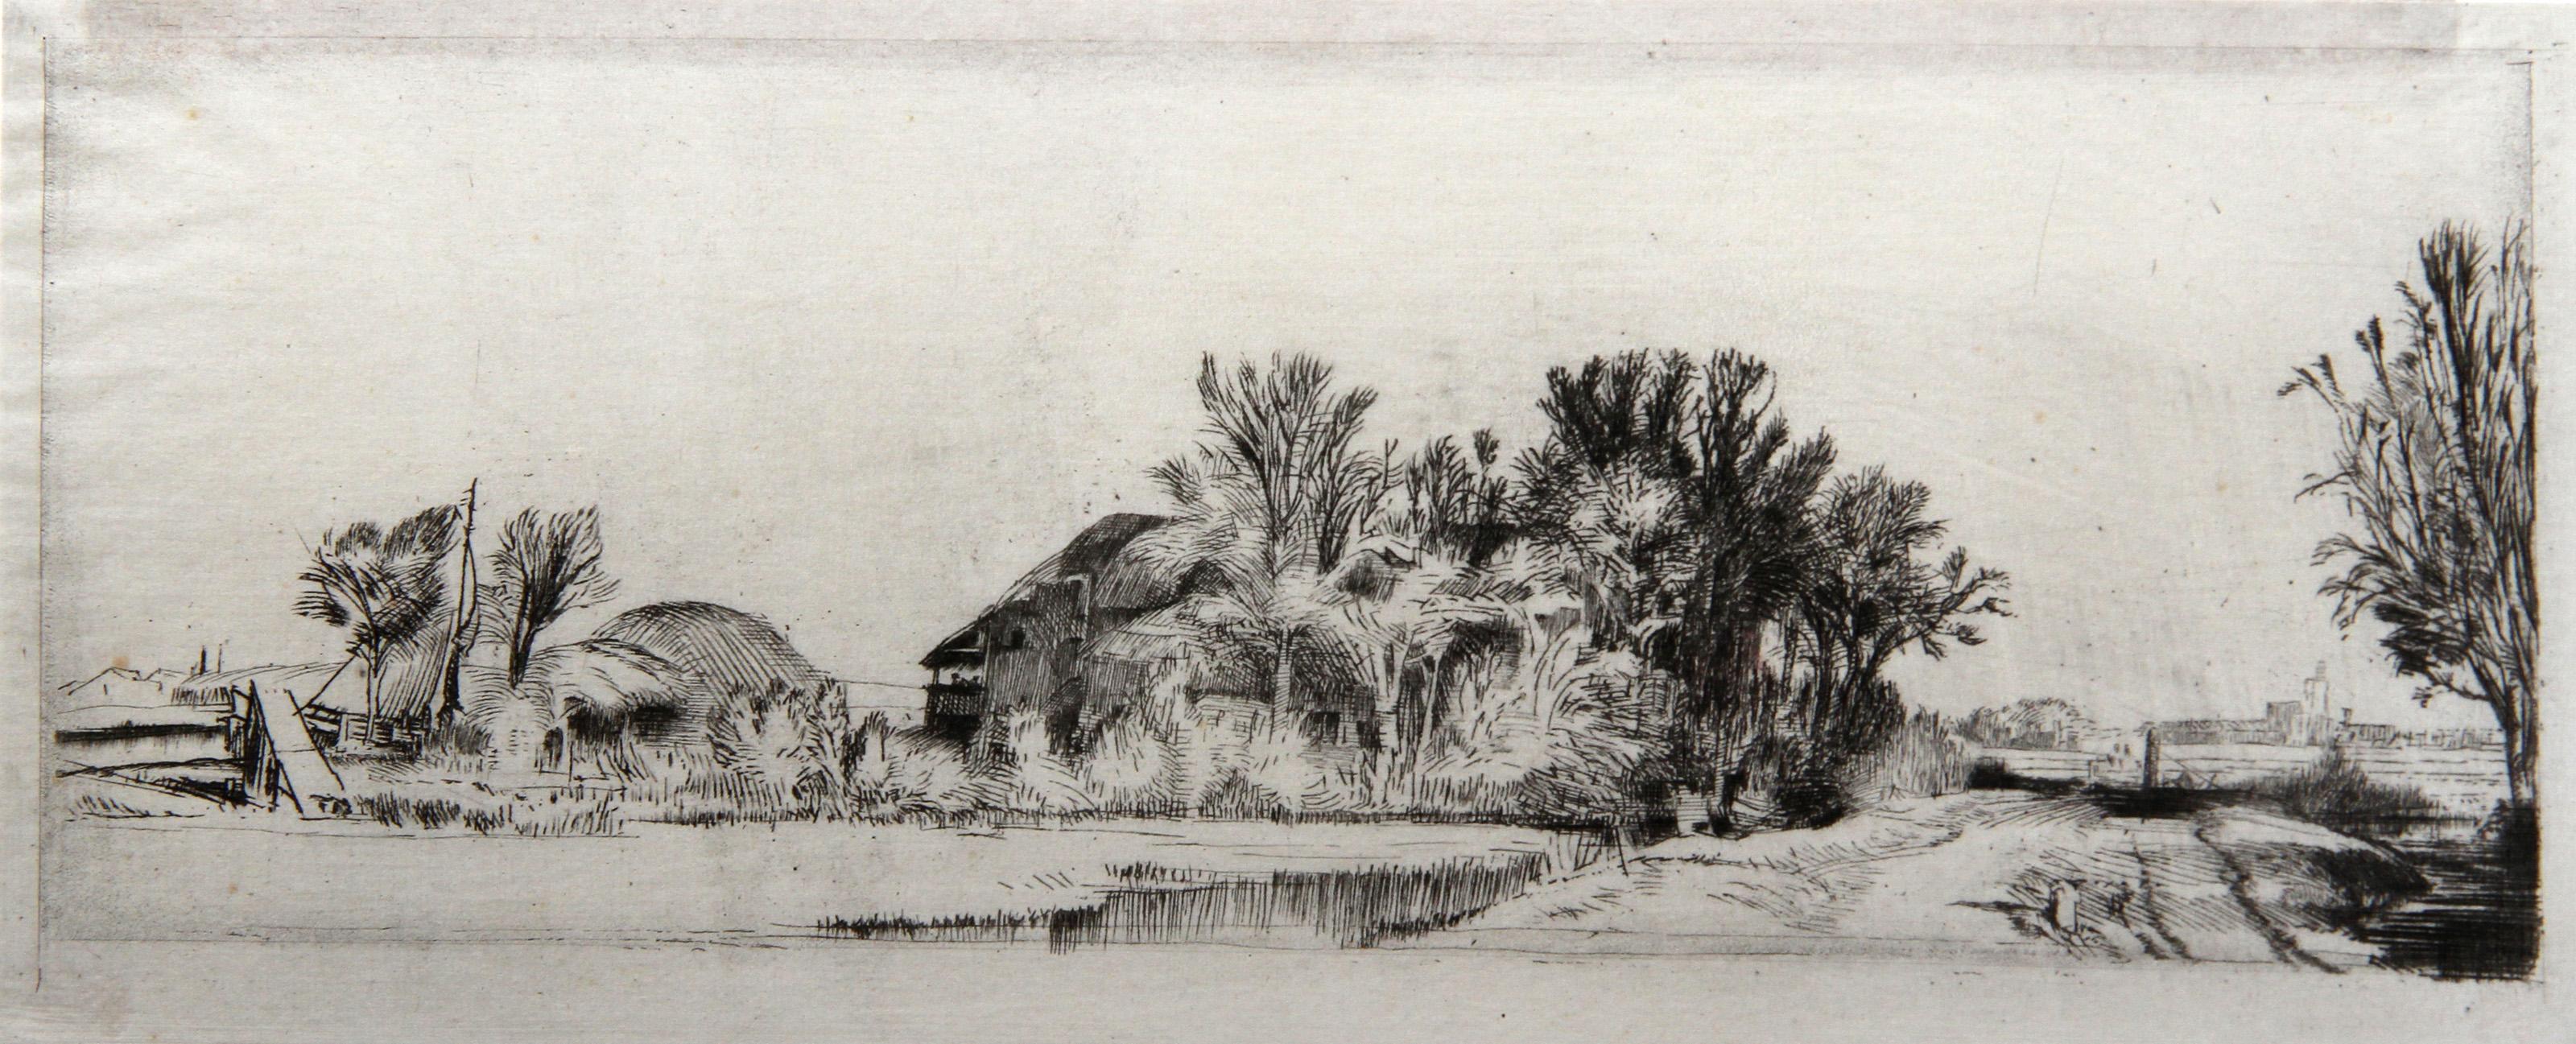  Rembrandt van Rijn, After by Amand Durand, Dutch (1606 - 1669) - Le Canal (B221), Year: 1878 (of original 1652), Medium: Heliogravure, Size: 3  x 8.25 in. (7.62  x 20.96 cm), Printer: Amand Durand, Description: French Engraver and painter Charles